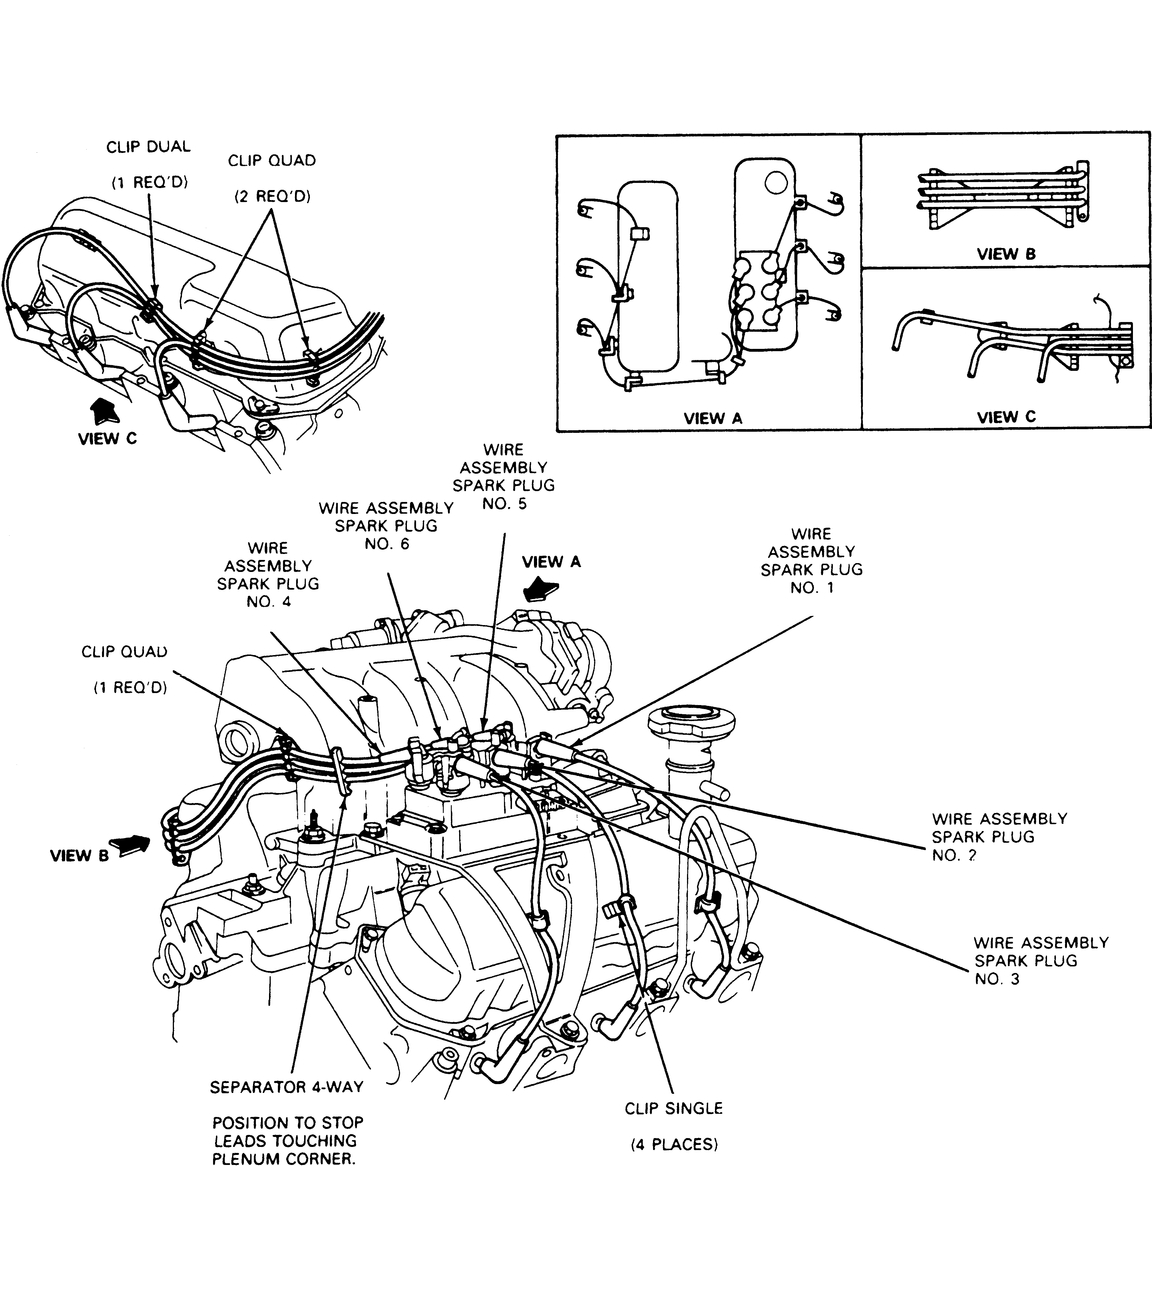 Mo_9698] Need A Firing Order Diagram For A 2000 Chevy Solved